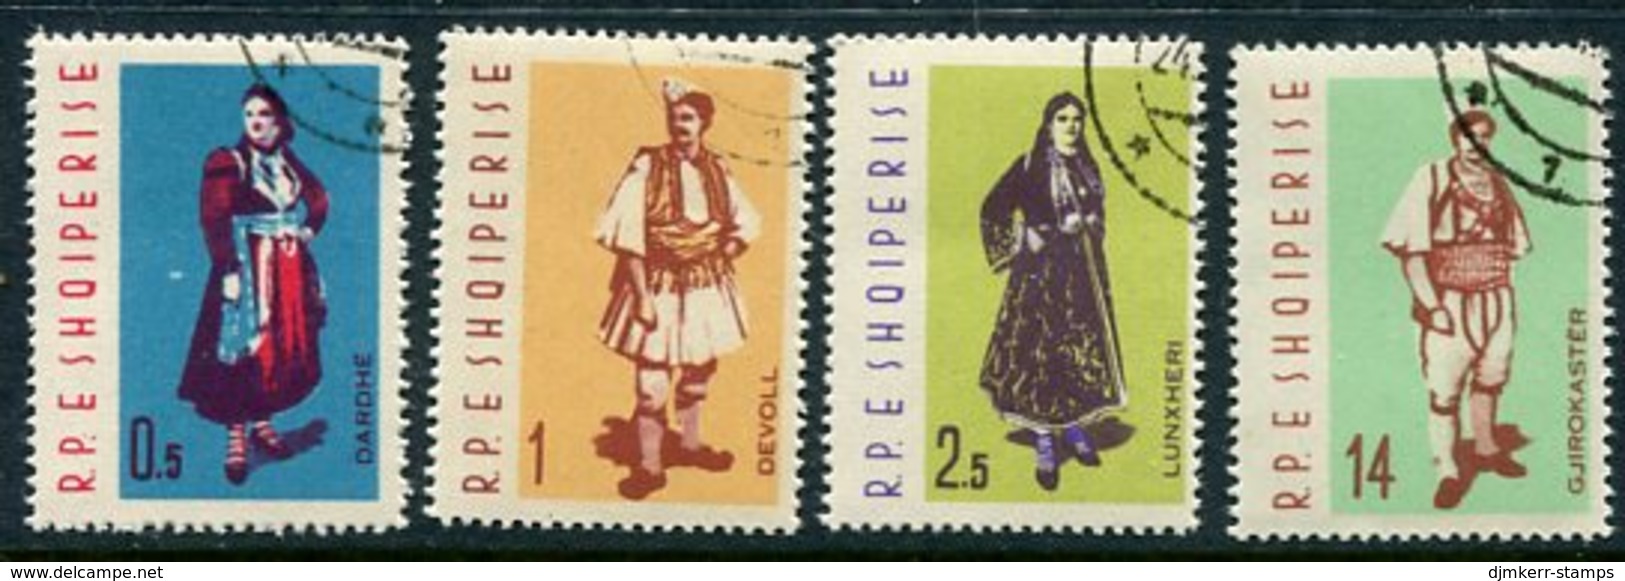 ALBANIA 1962 Traditional Costumes Perforated Set Used.  Michel 695-98A - Albanien